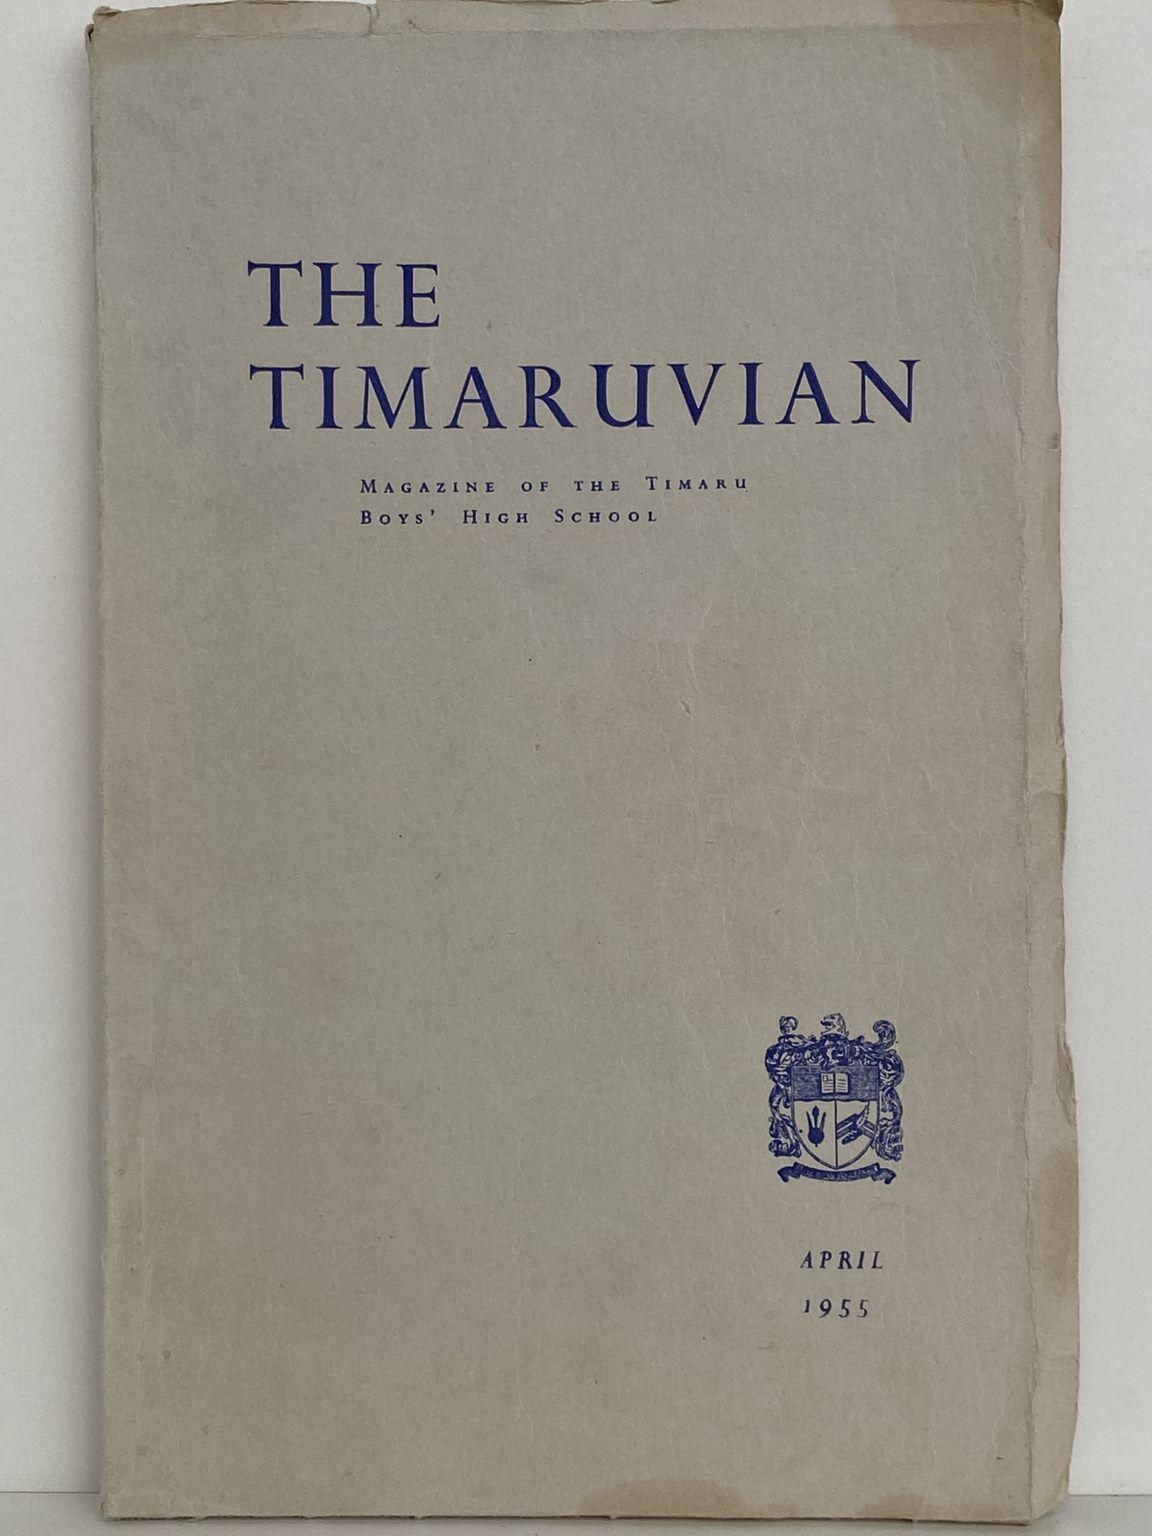 THE TIMARUVIAN: Magazine of the Timaru Boys' High School and its Old Boys' Association 1955